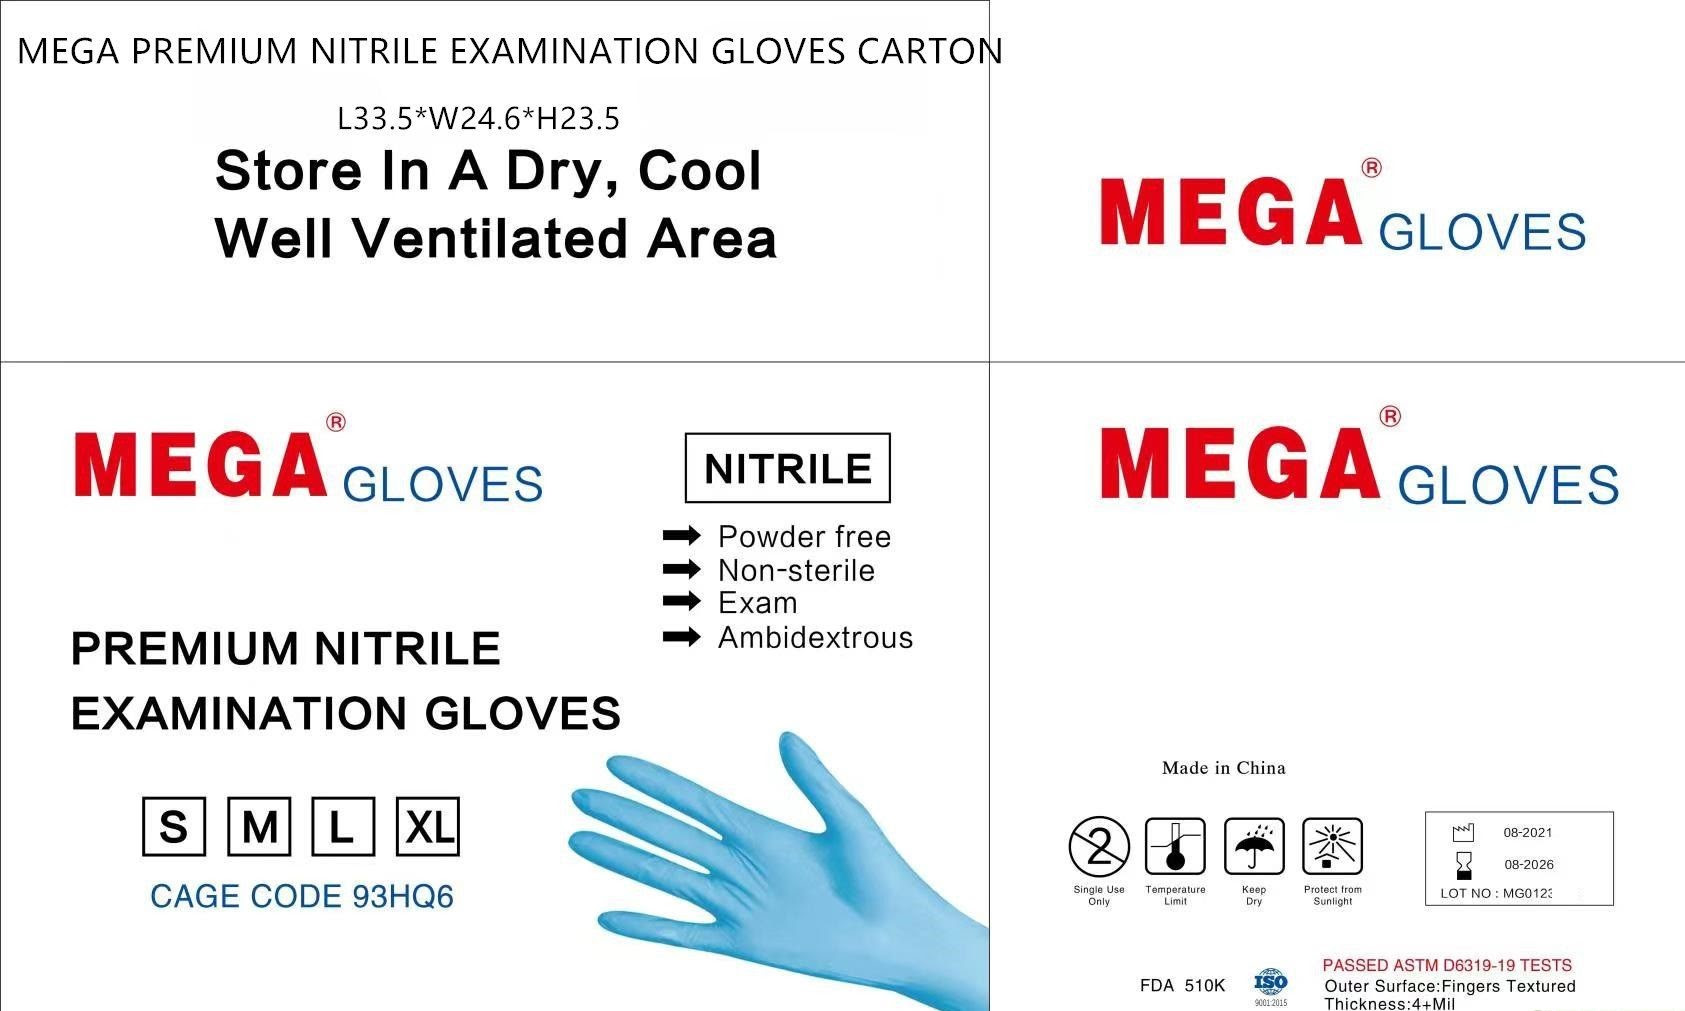 Mega Disposable Power Free Nitrile Gloves with FDA 510K. 224250Boxes. EXW Los Angeles box of 100gloves.